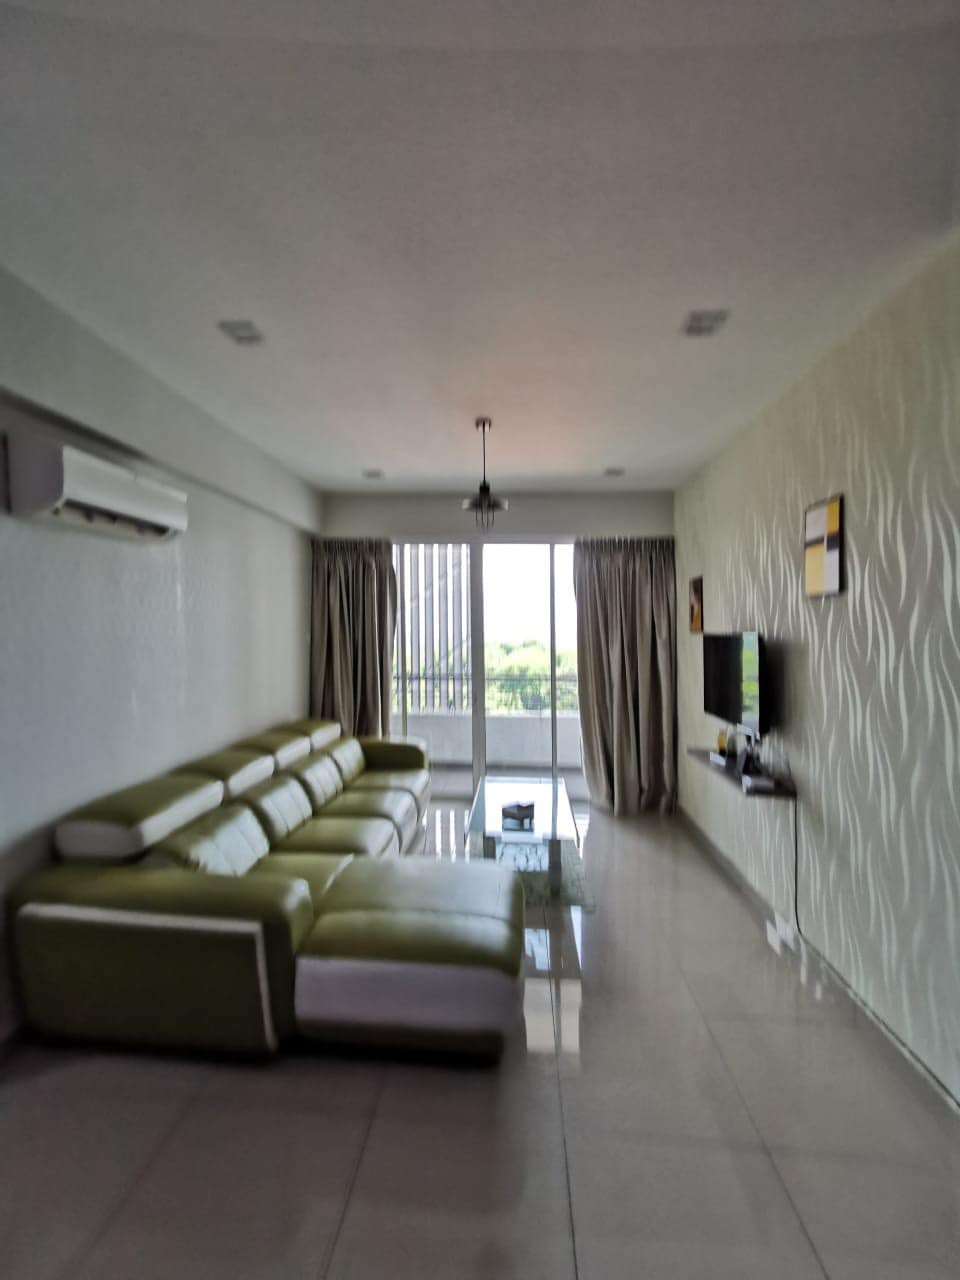 MyTown Homestay Majestic Ipoh 2BR 6 Pax